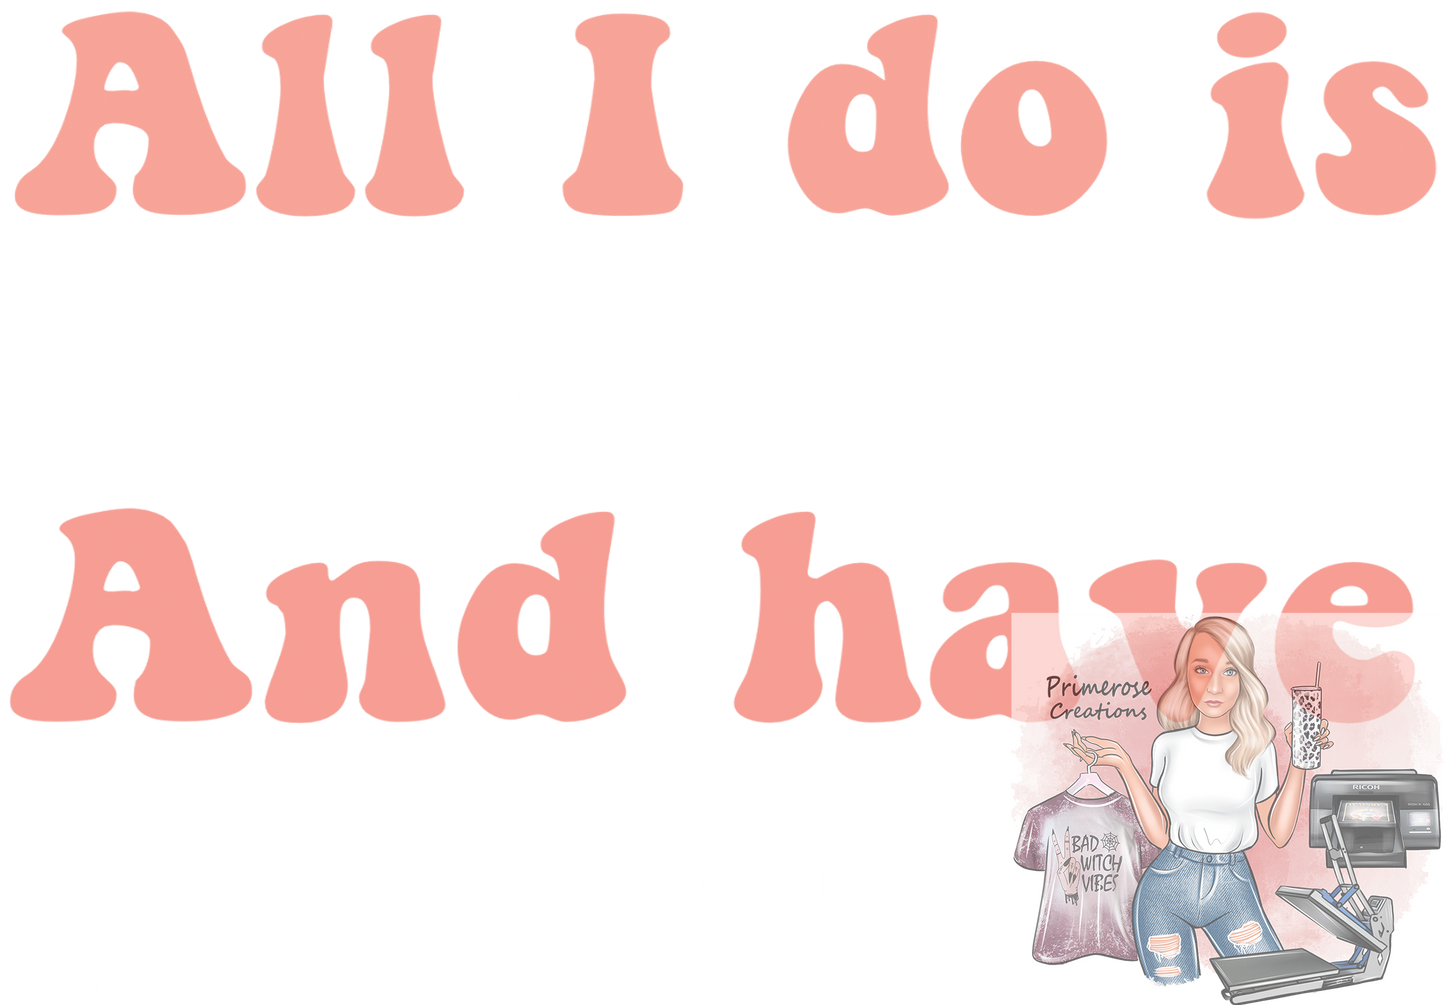 All I Do Is Talk Shit and Have Panic Attacks White DTF